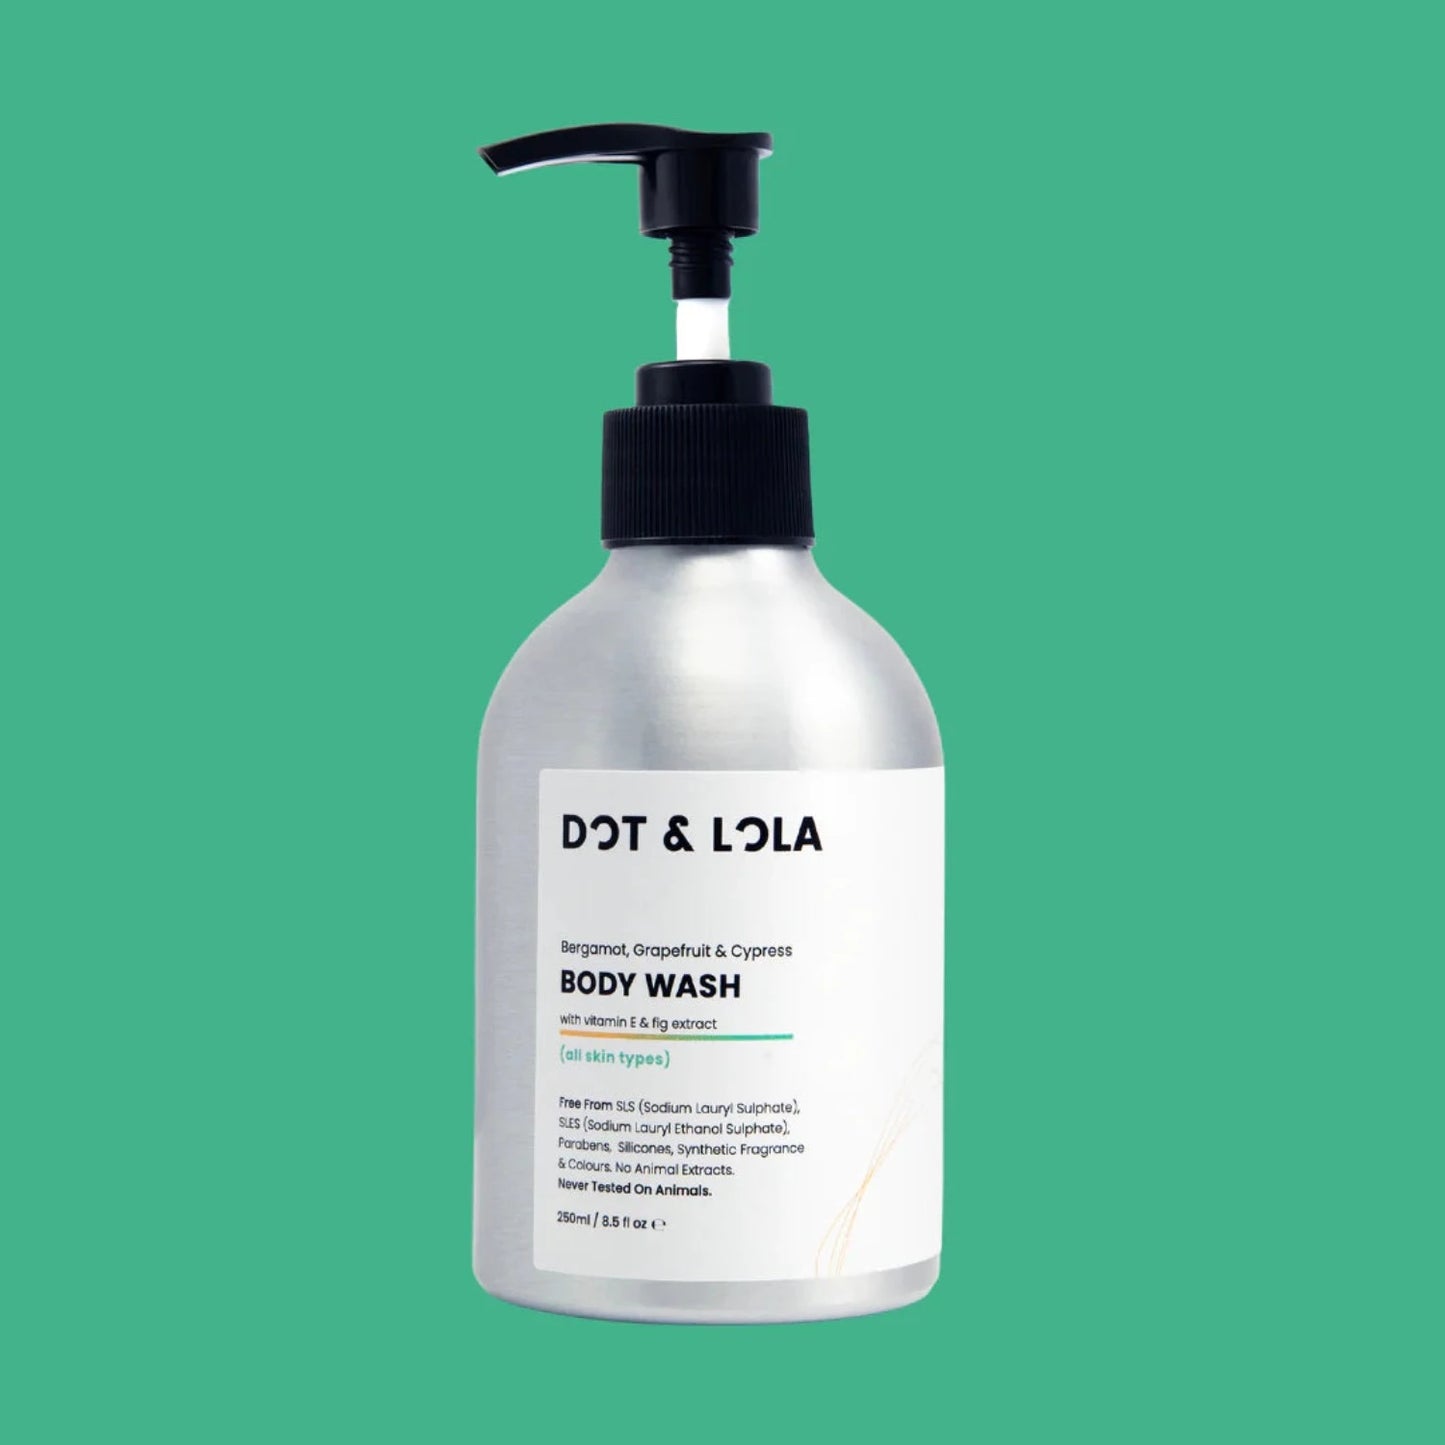 DOT & LOLA Body Wash With Bergamot, Grapefruit & Cypress is a natural body cleanser that keeps skin Ph balanced.